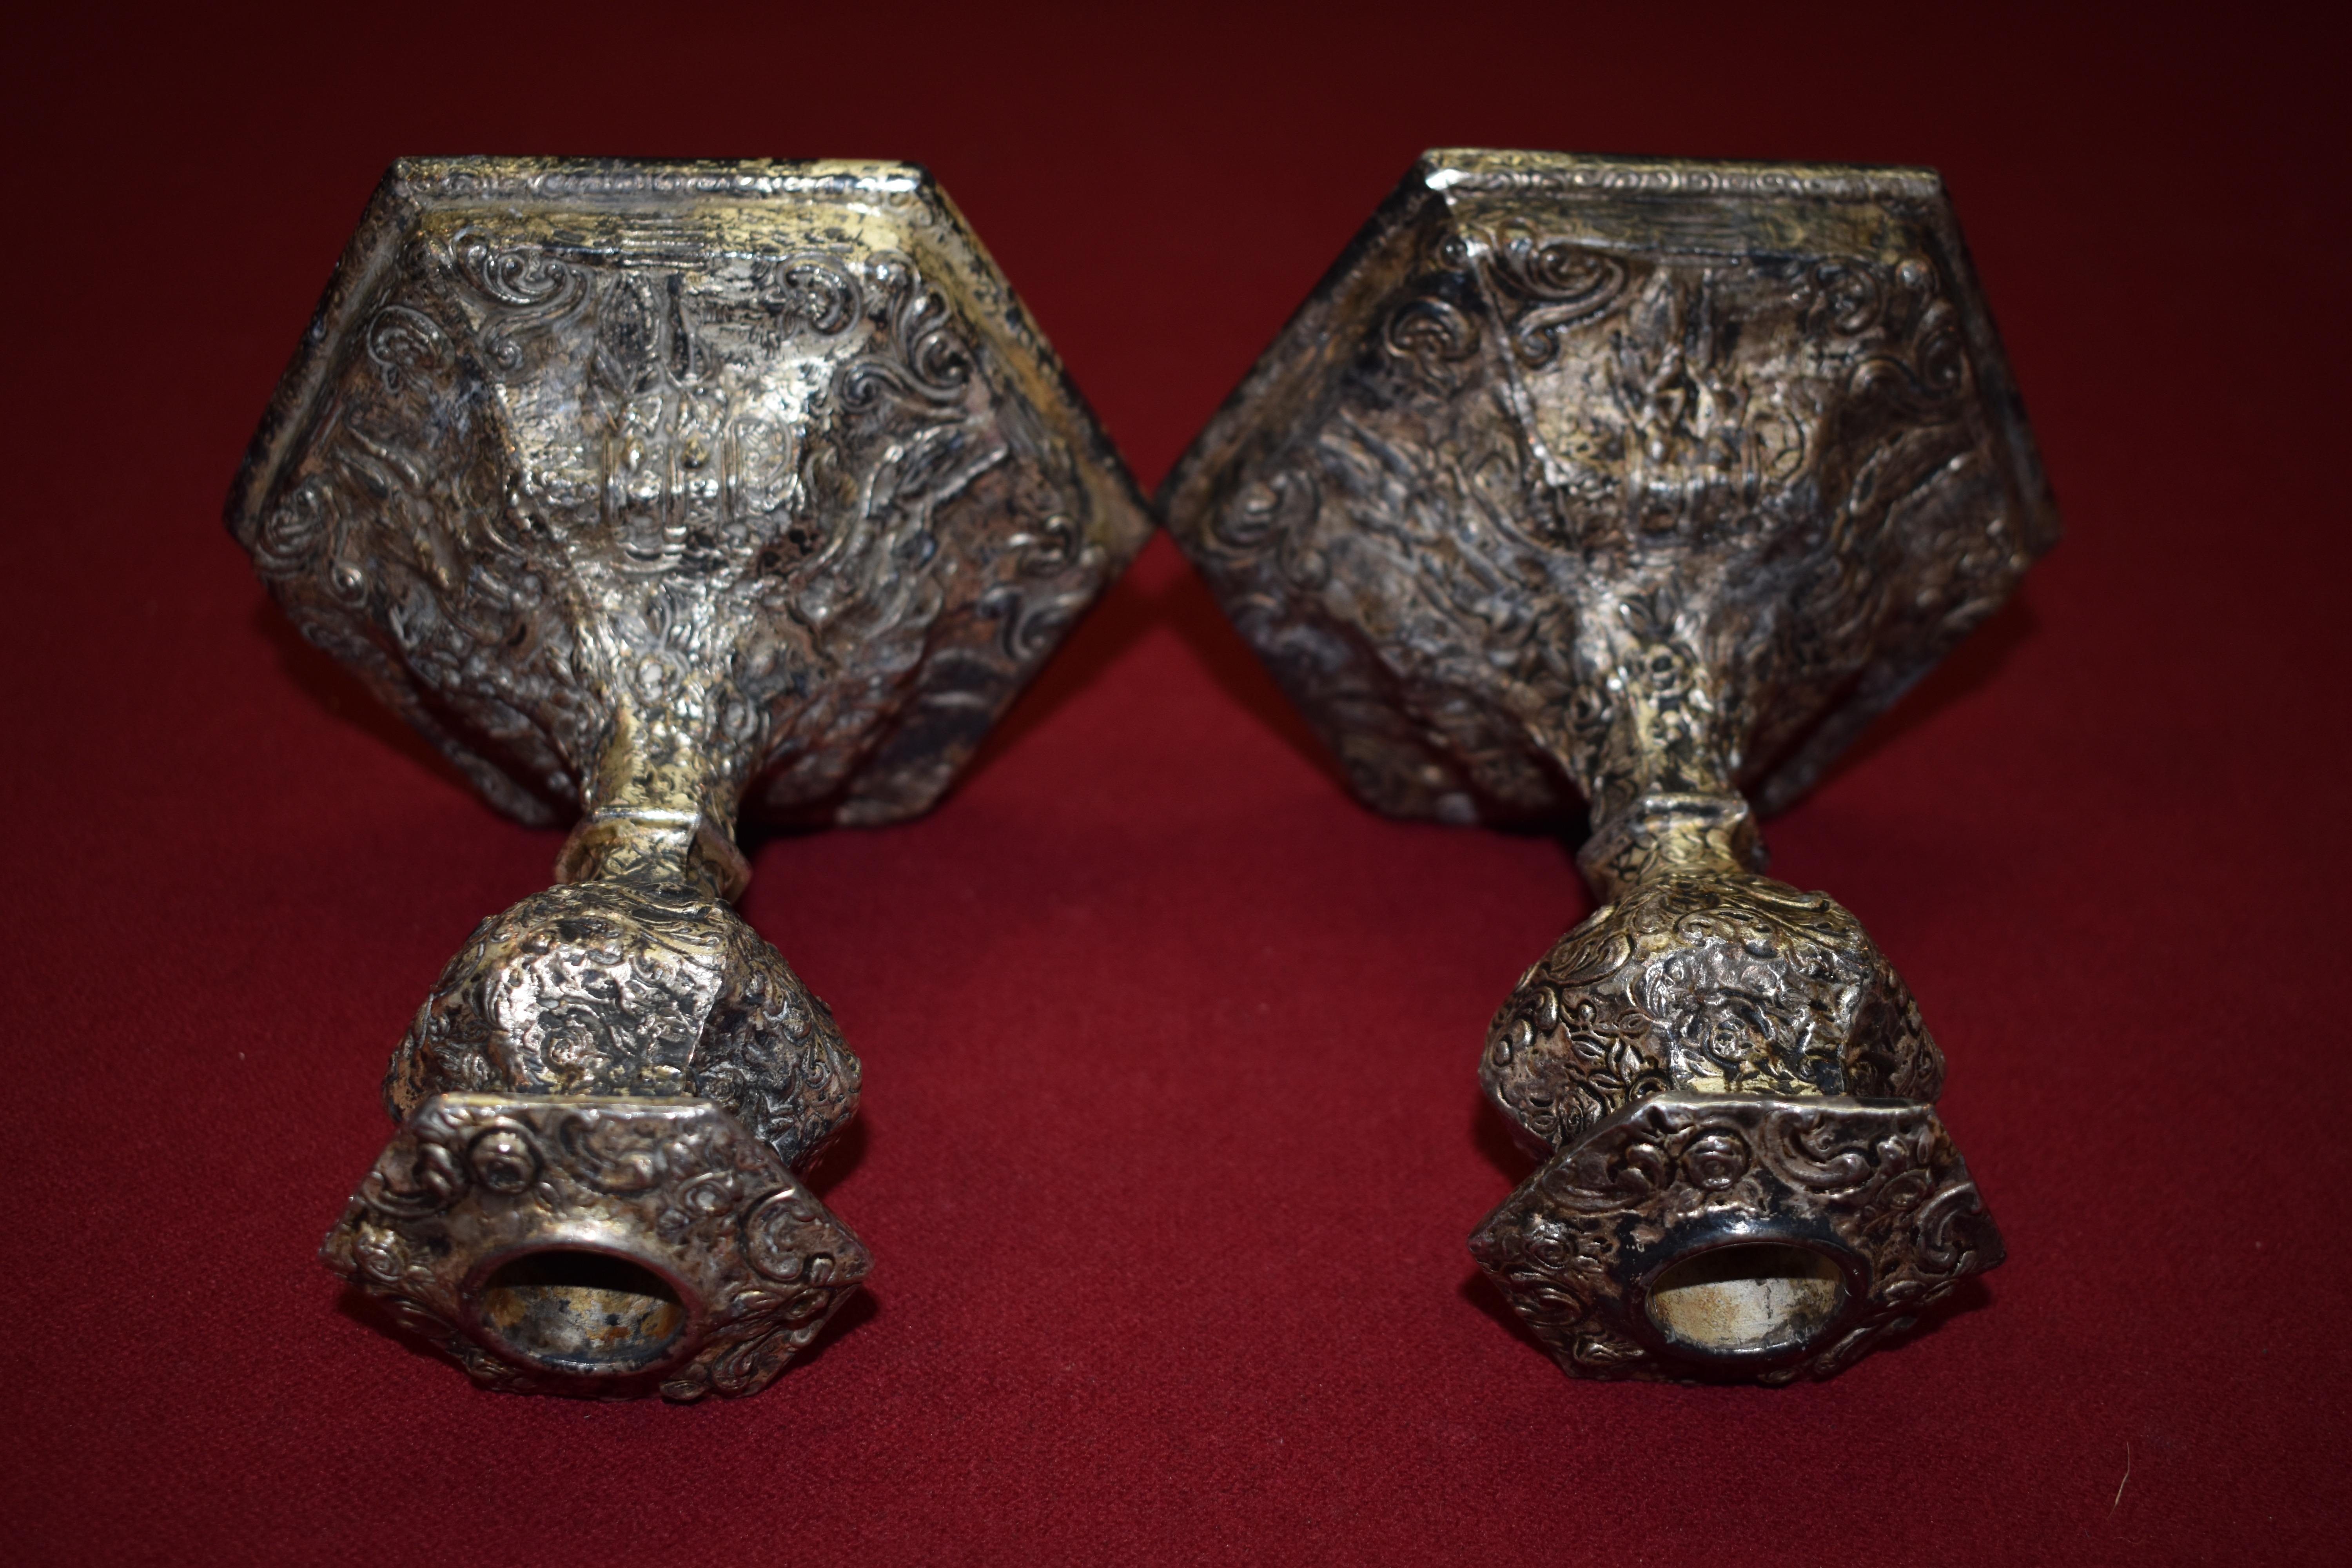 Weidlich Bros. Silver plate candle holders circa 1922 Bridgeport, CT. #2343. Very good condition and excellent patina. The candlesticks are very ornately detailed with a man and a woman couple and a variety of florals. Base is 5